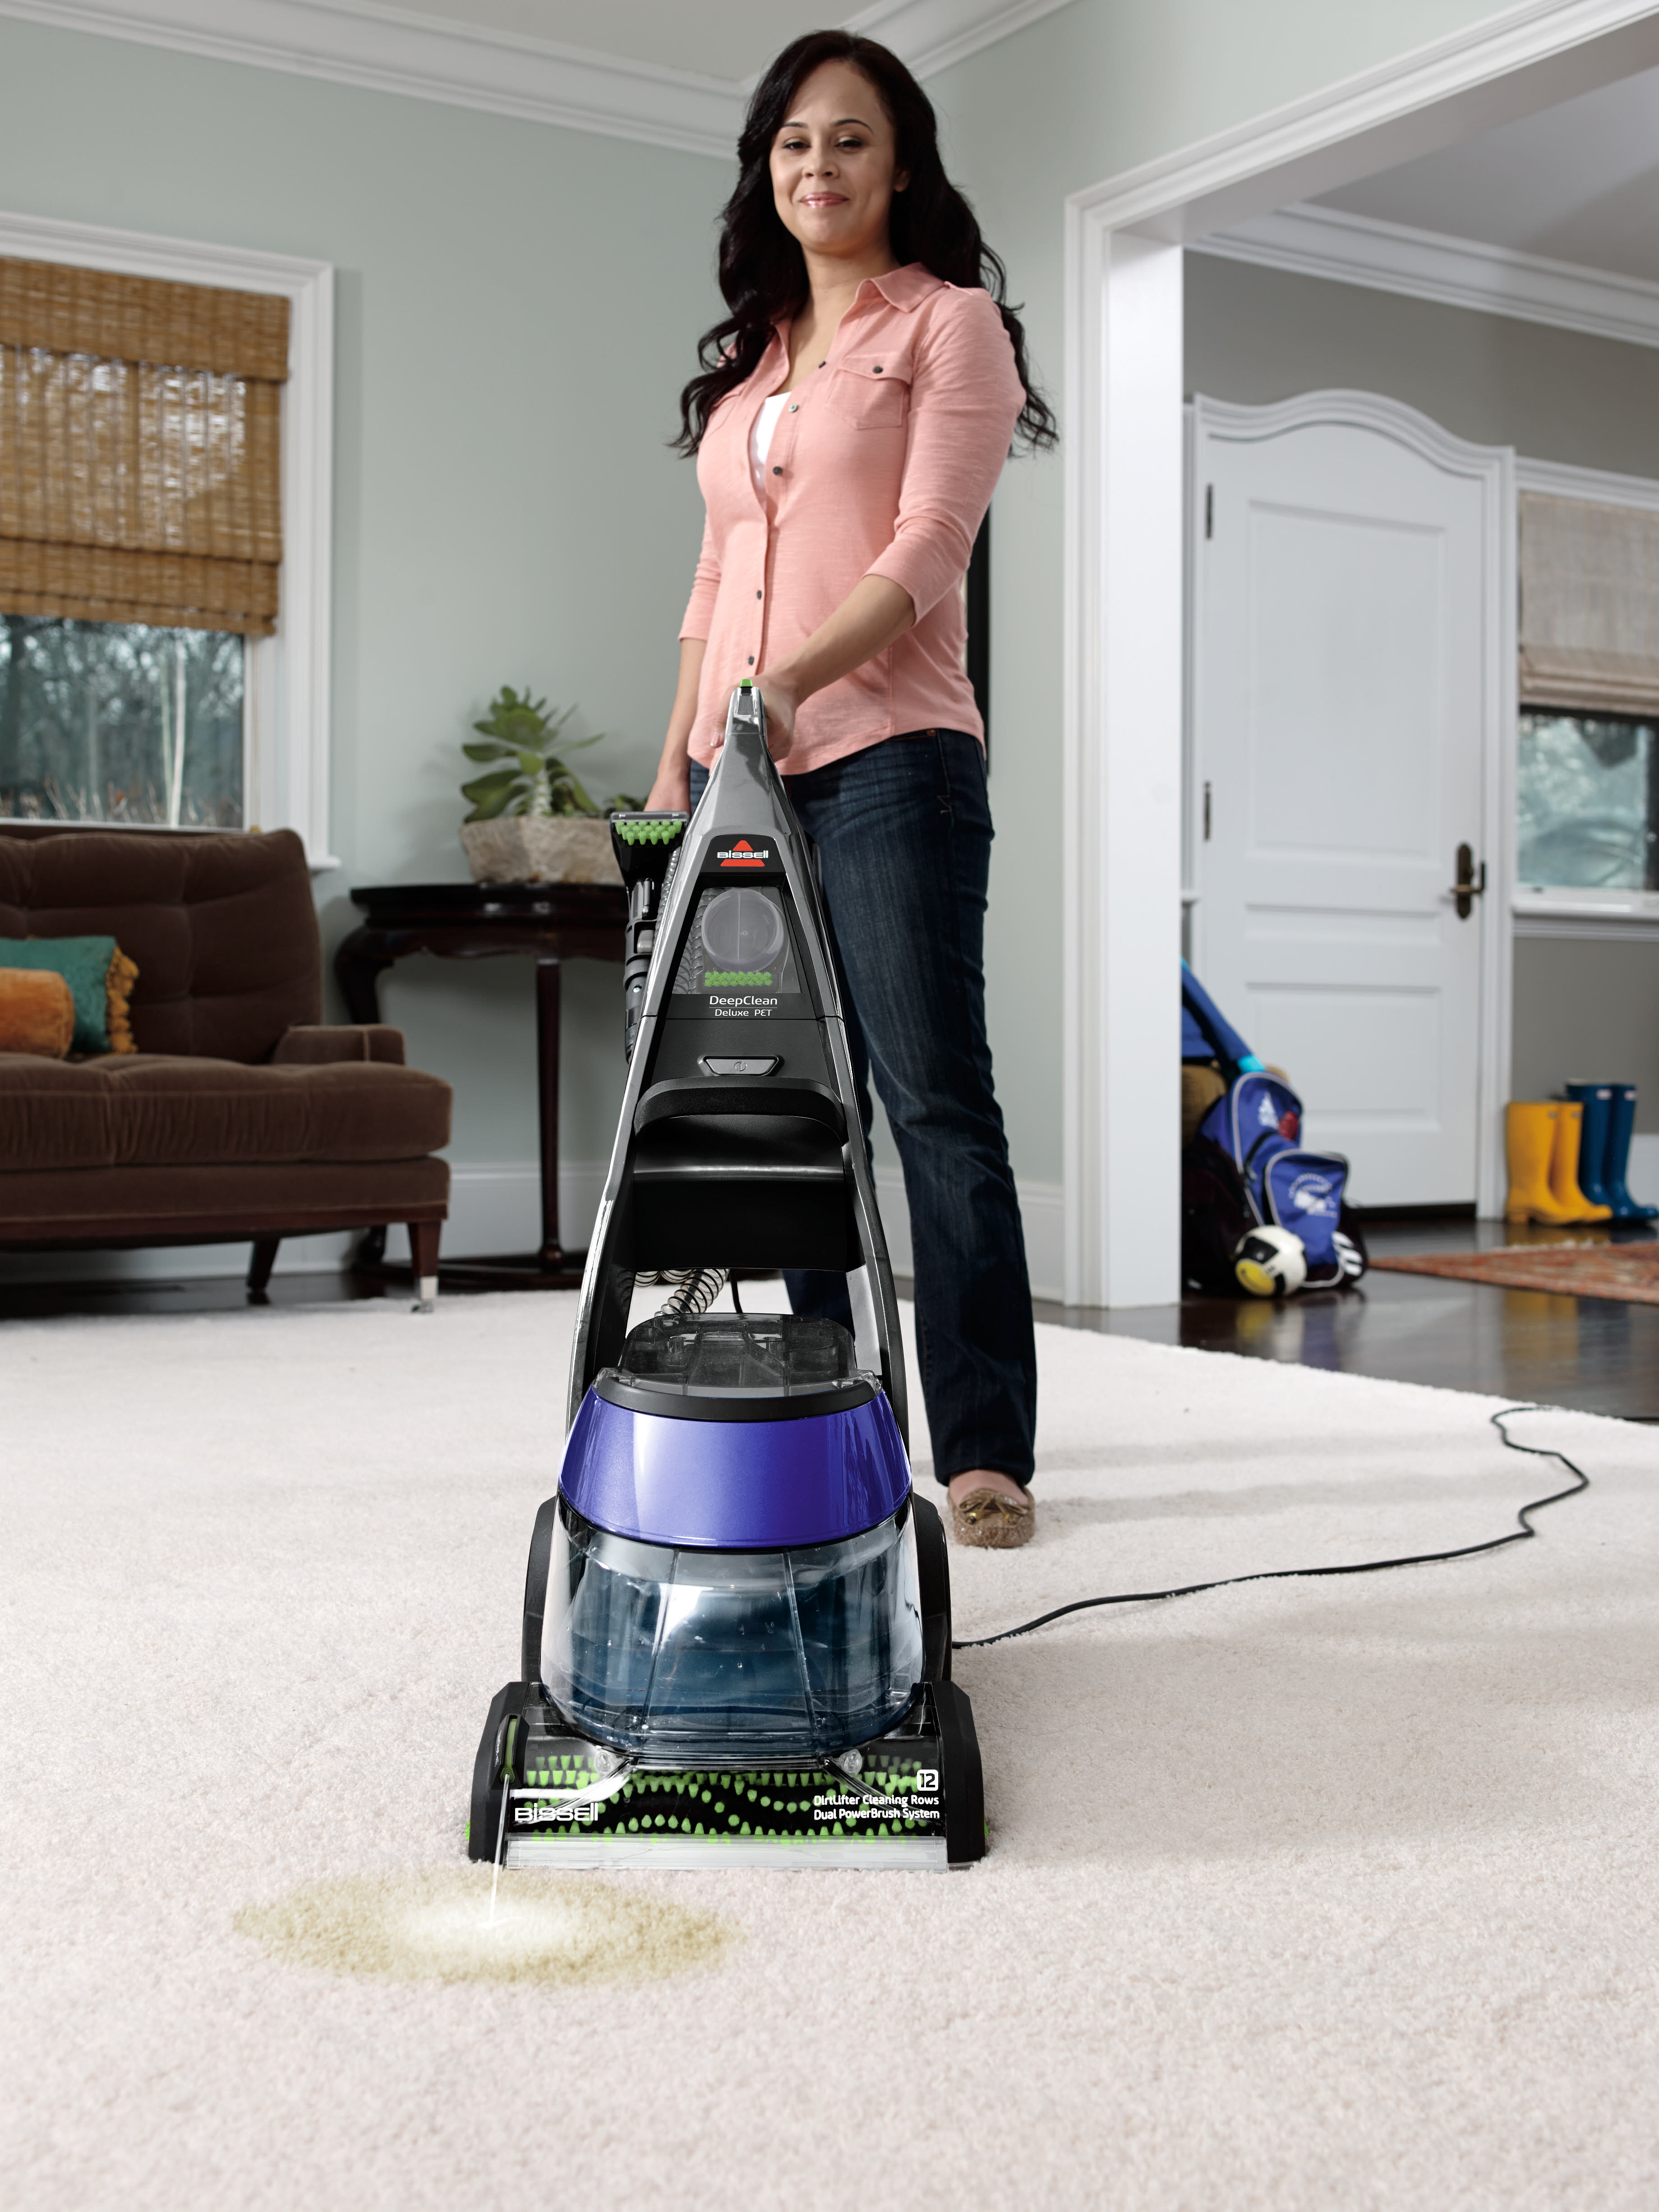 Bissell 36Z9 DeepClean Deluxe Pet Full Size Upright Carpet Cleaner and Shampooer - image 4 of 11